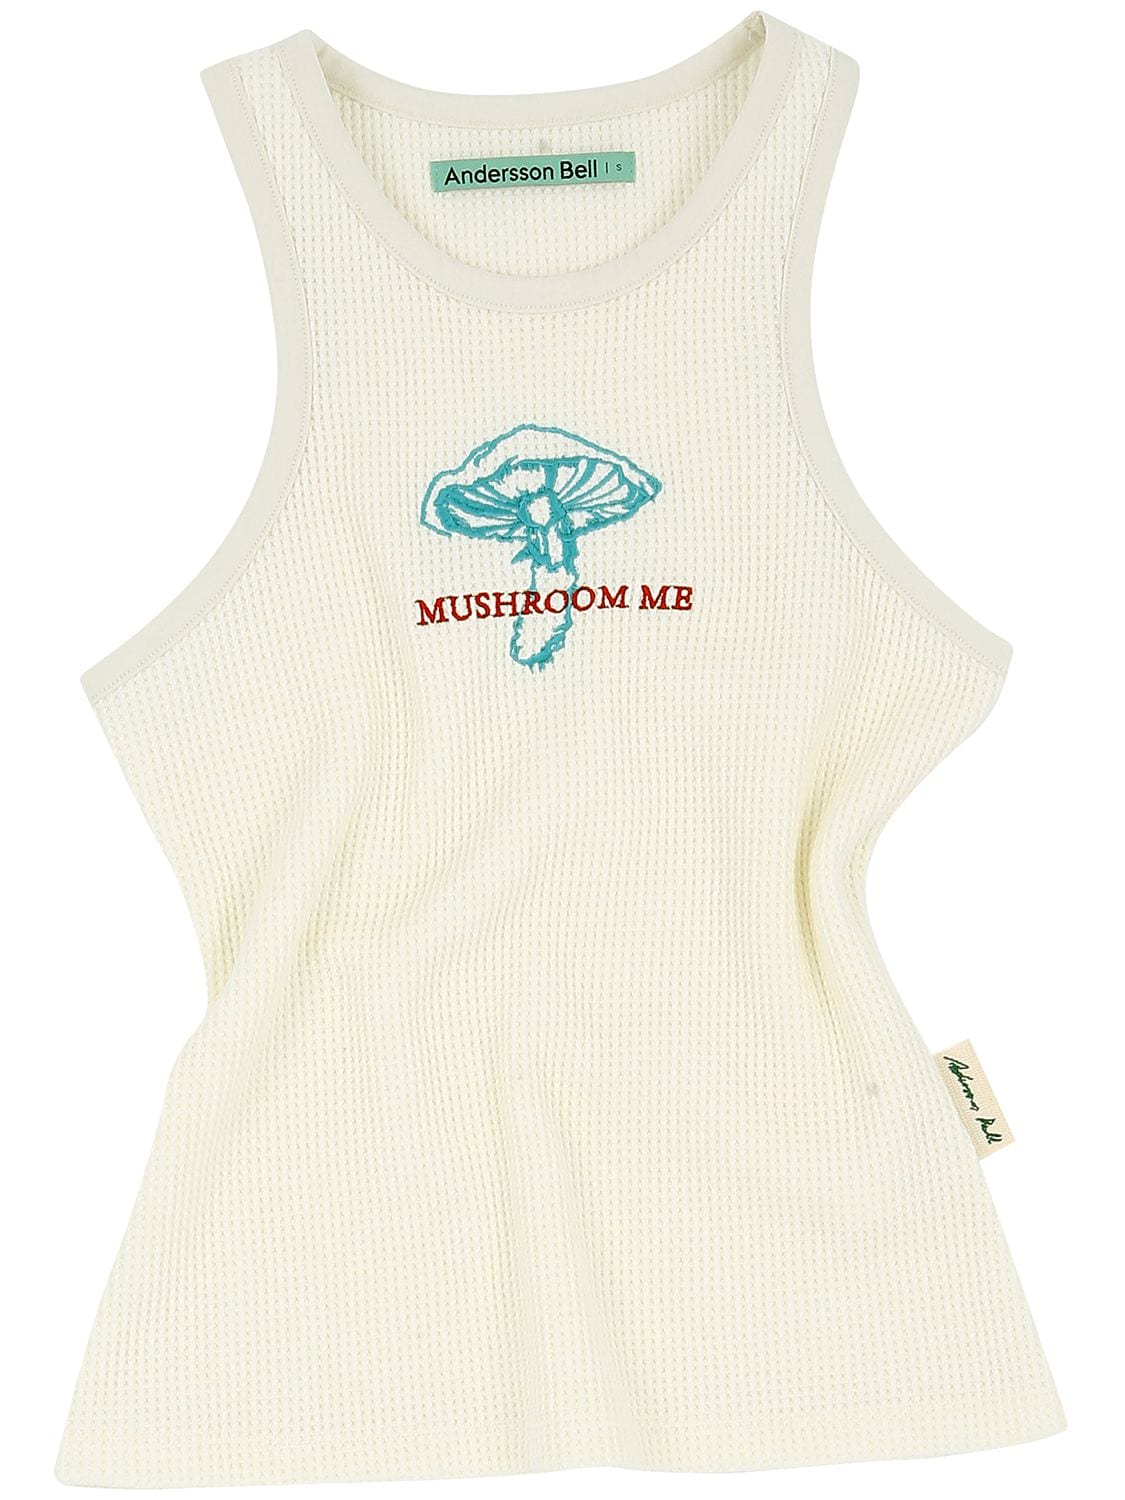 ANDERSSON BELL MUSHROOM EMBROIDERY COTTON TANK TOP